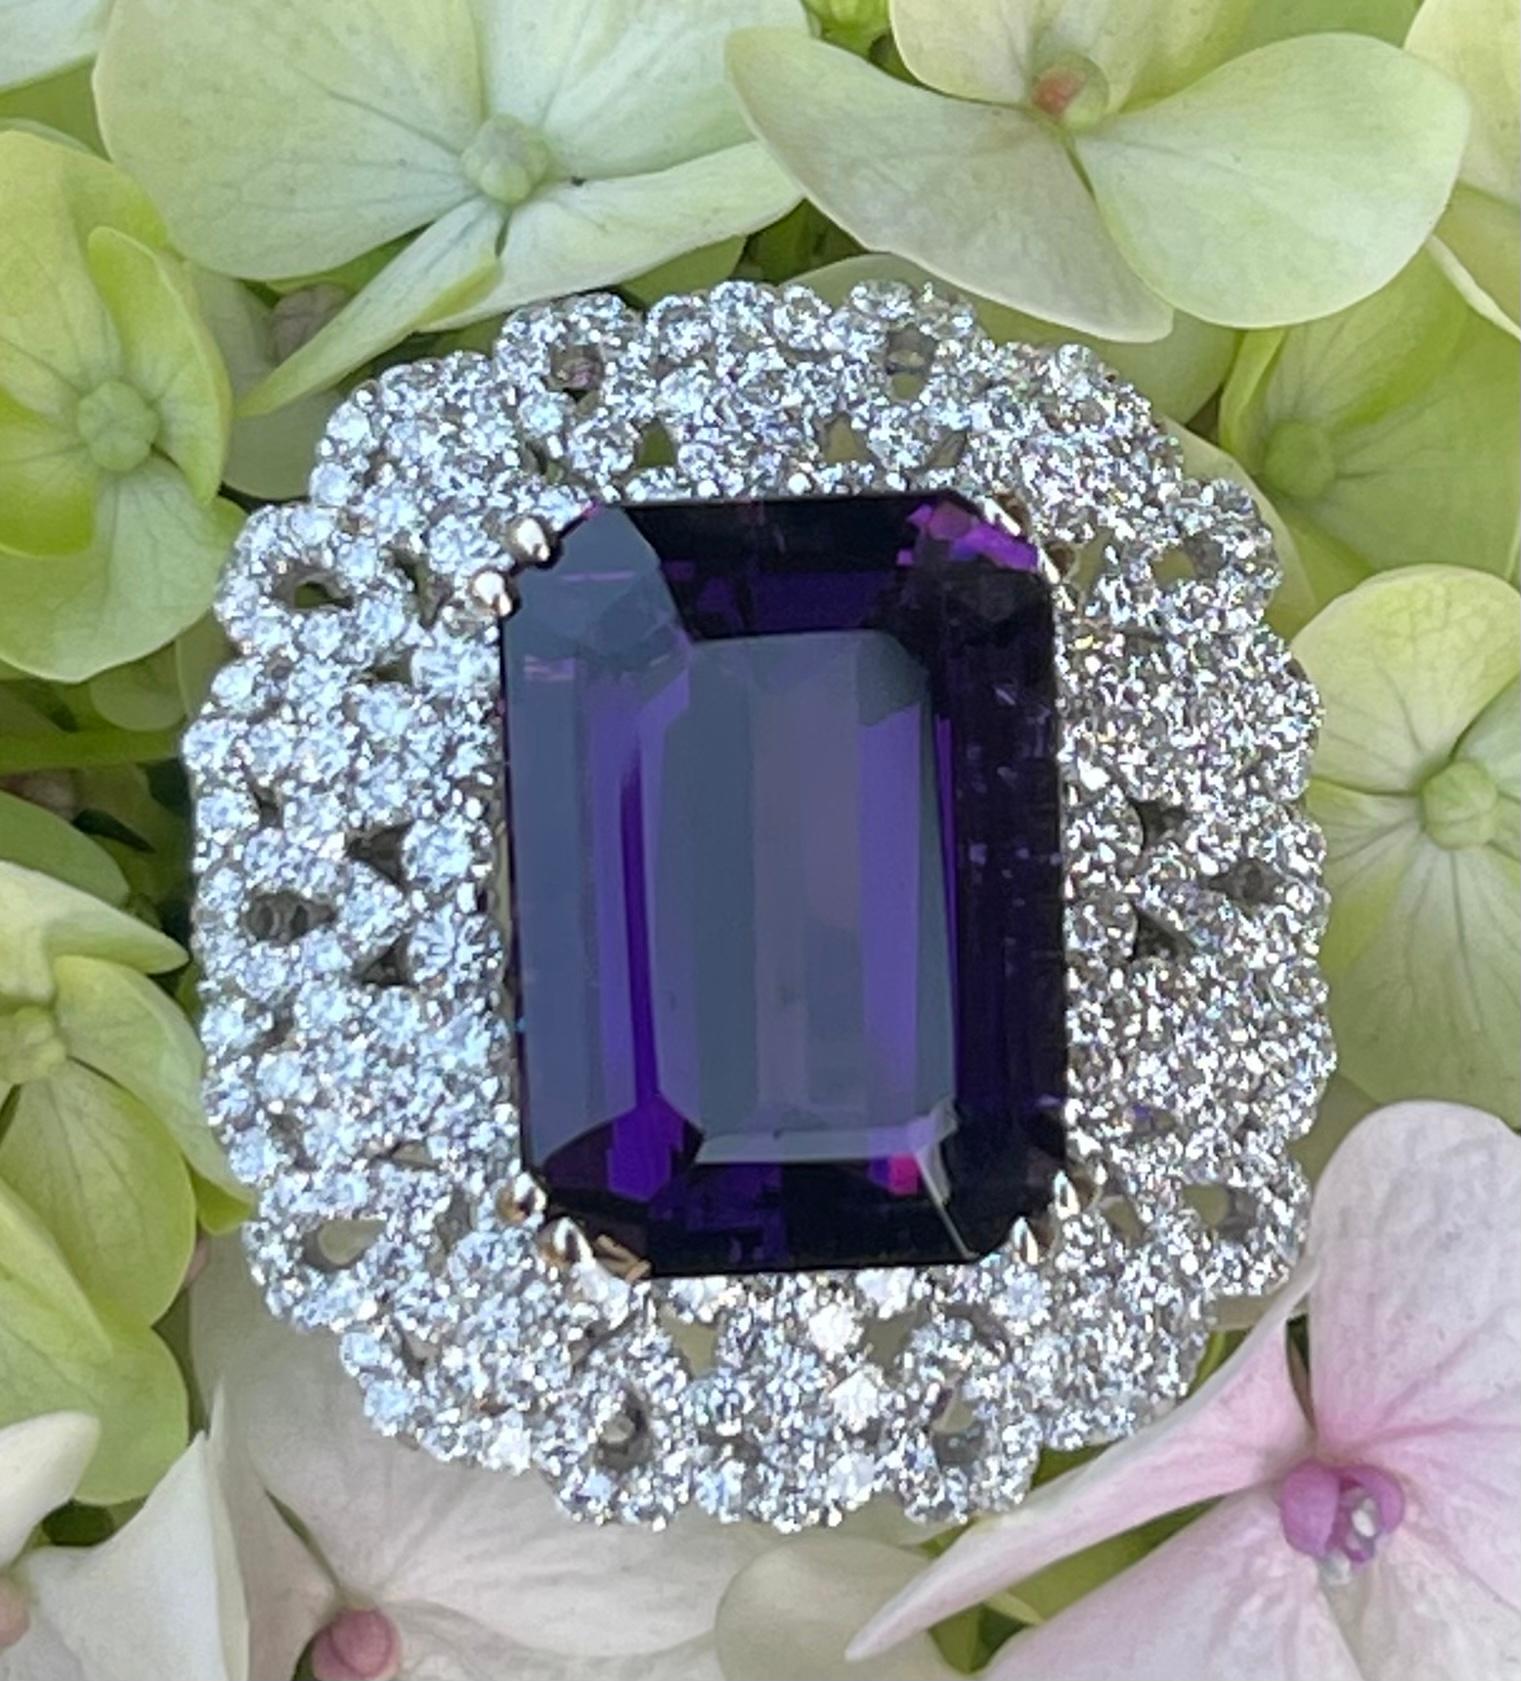 Magnificent 15.29 carat rectangular step-cut or emerald cut, deep purple Siberian amethyst is talon prong set above a dazzling approximately 7.38 carat diamond mounting featuring a repetitive flower and pear pattern of round brilliant white diamonds